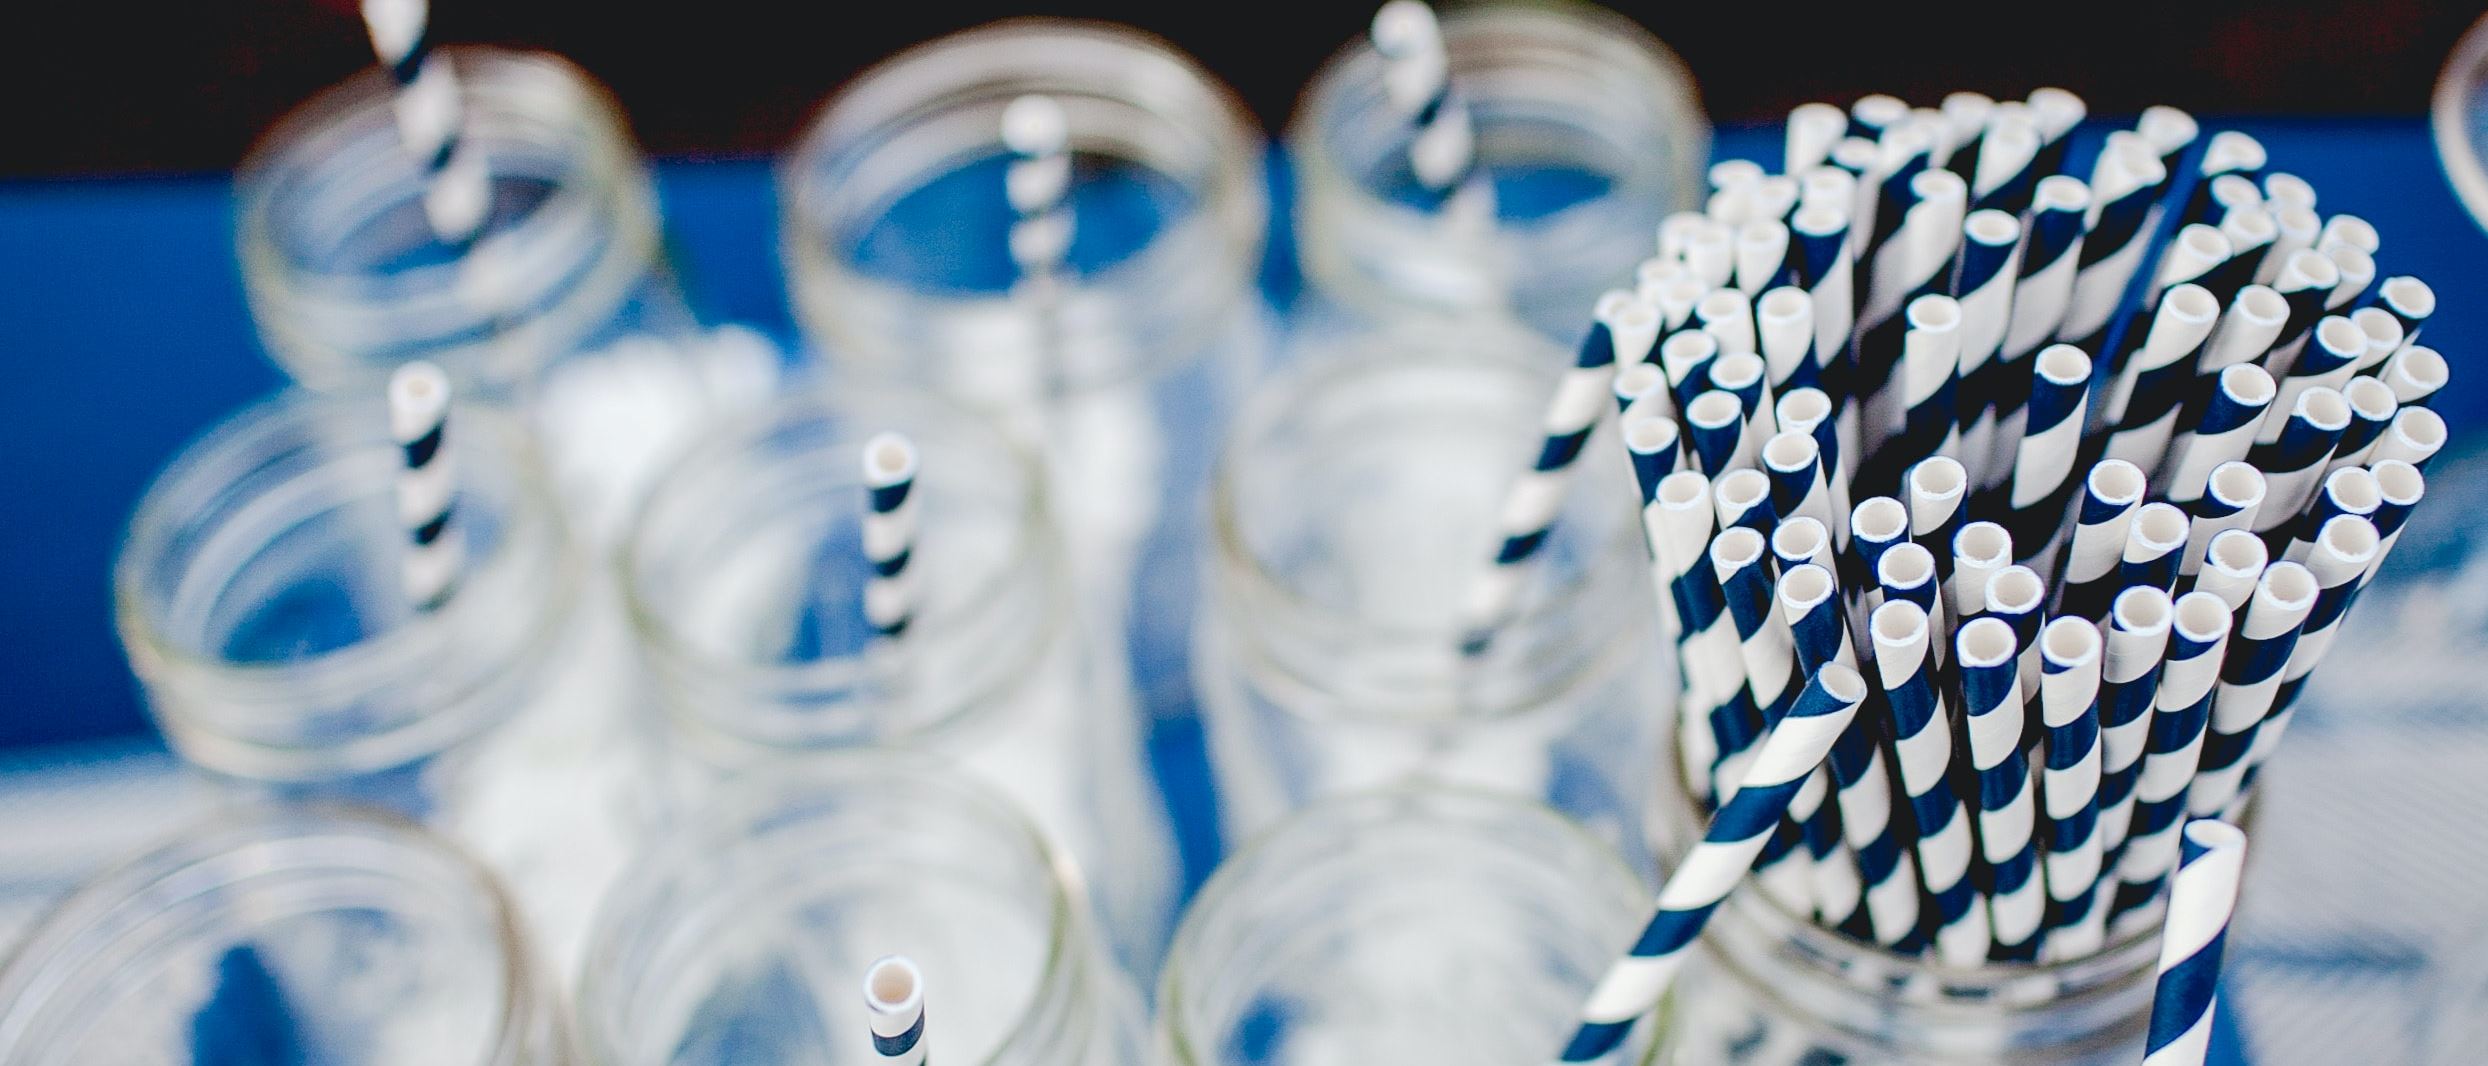 How Do Paper Straws Work?